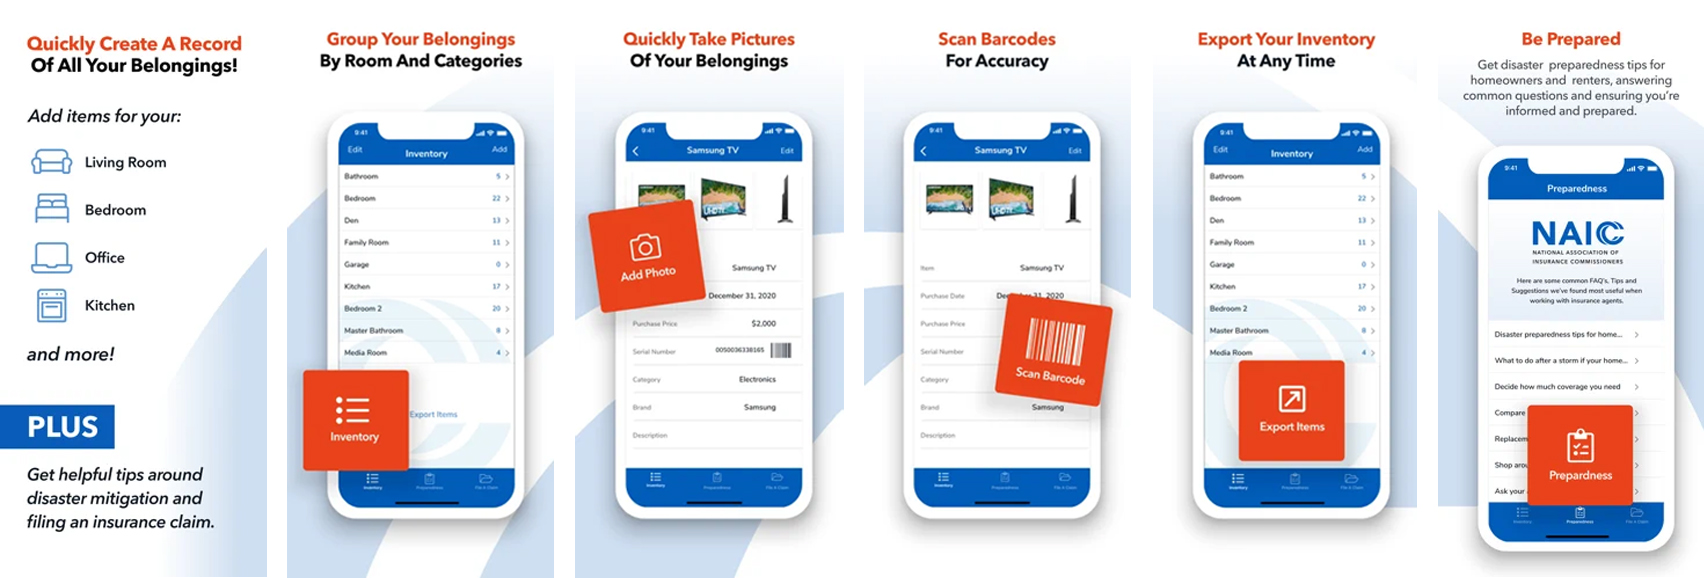 The NAIC Home Inventory App makes it easy to create a record of all your belongings, including the ability to scan barcodes and 